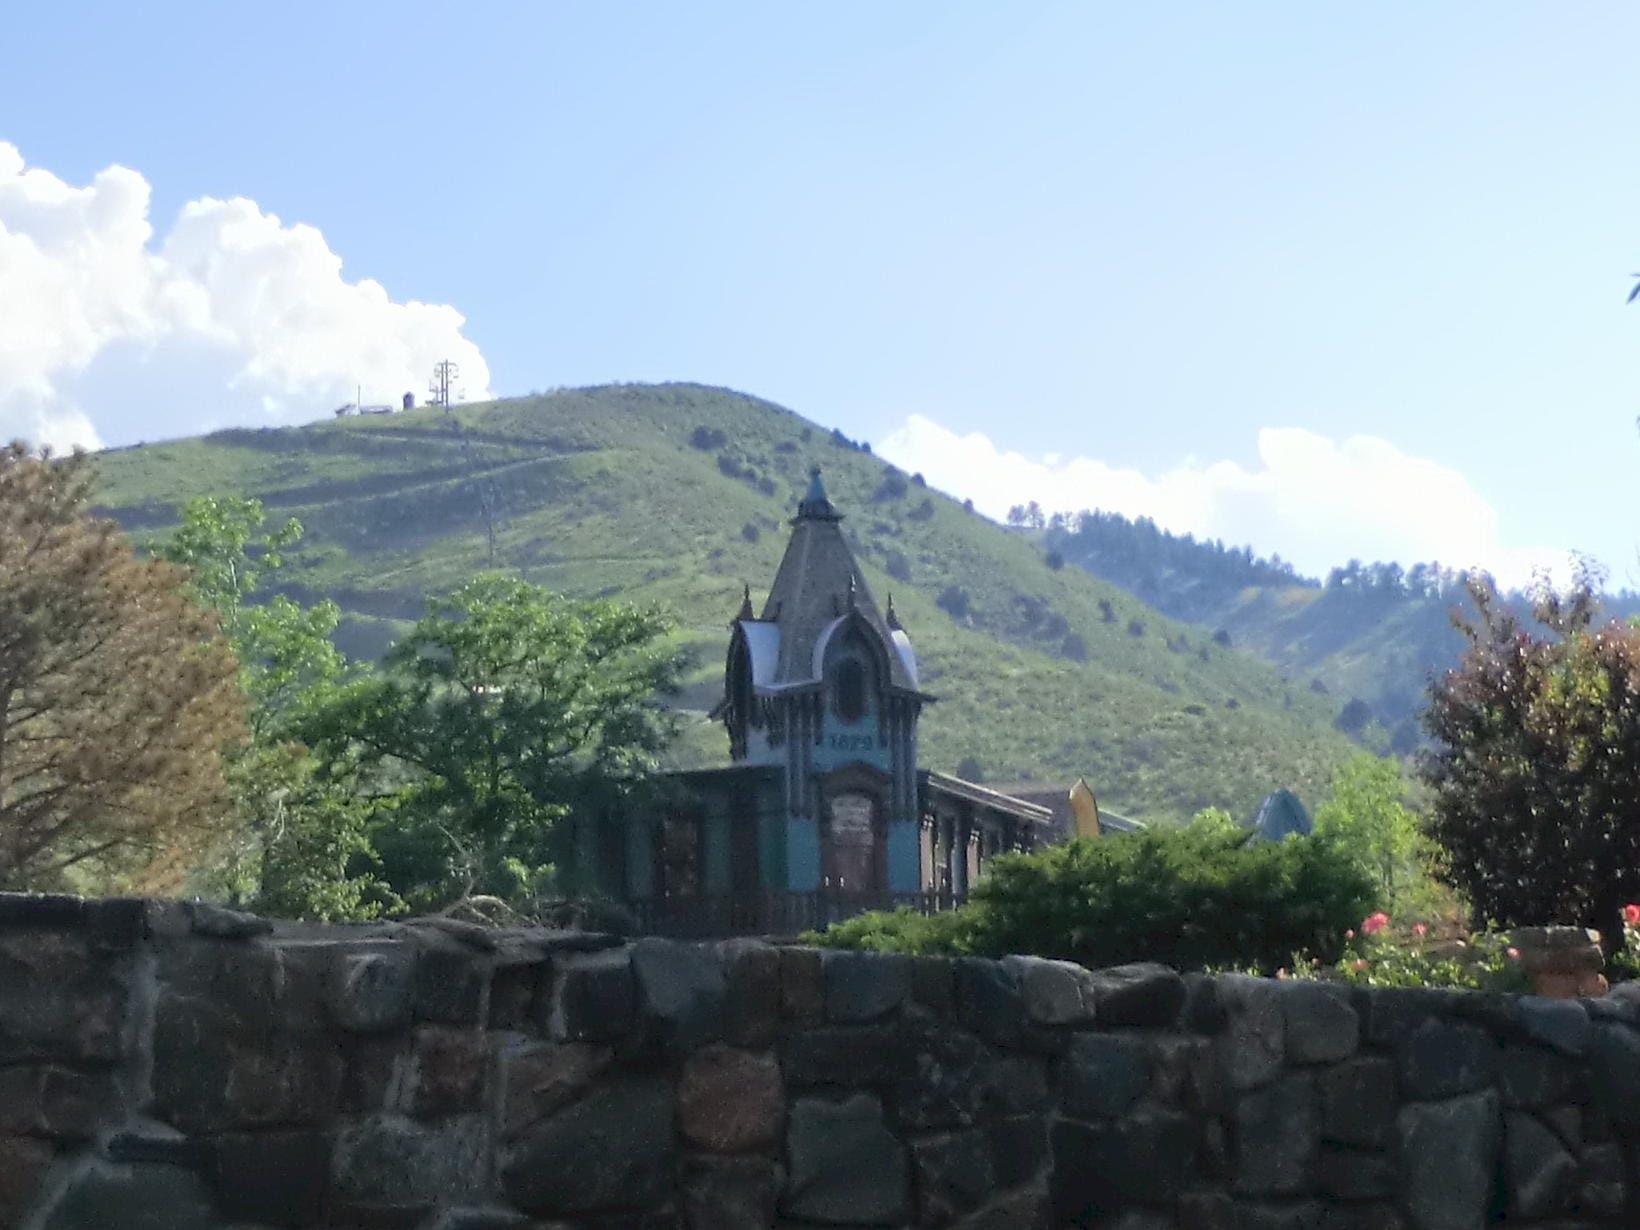 stone wall in the foreground, Victorian building with turret, mountain with alpine slide in background